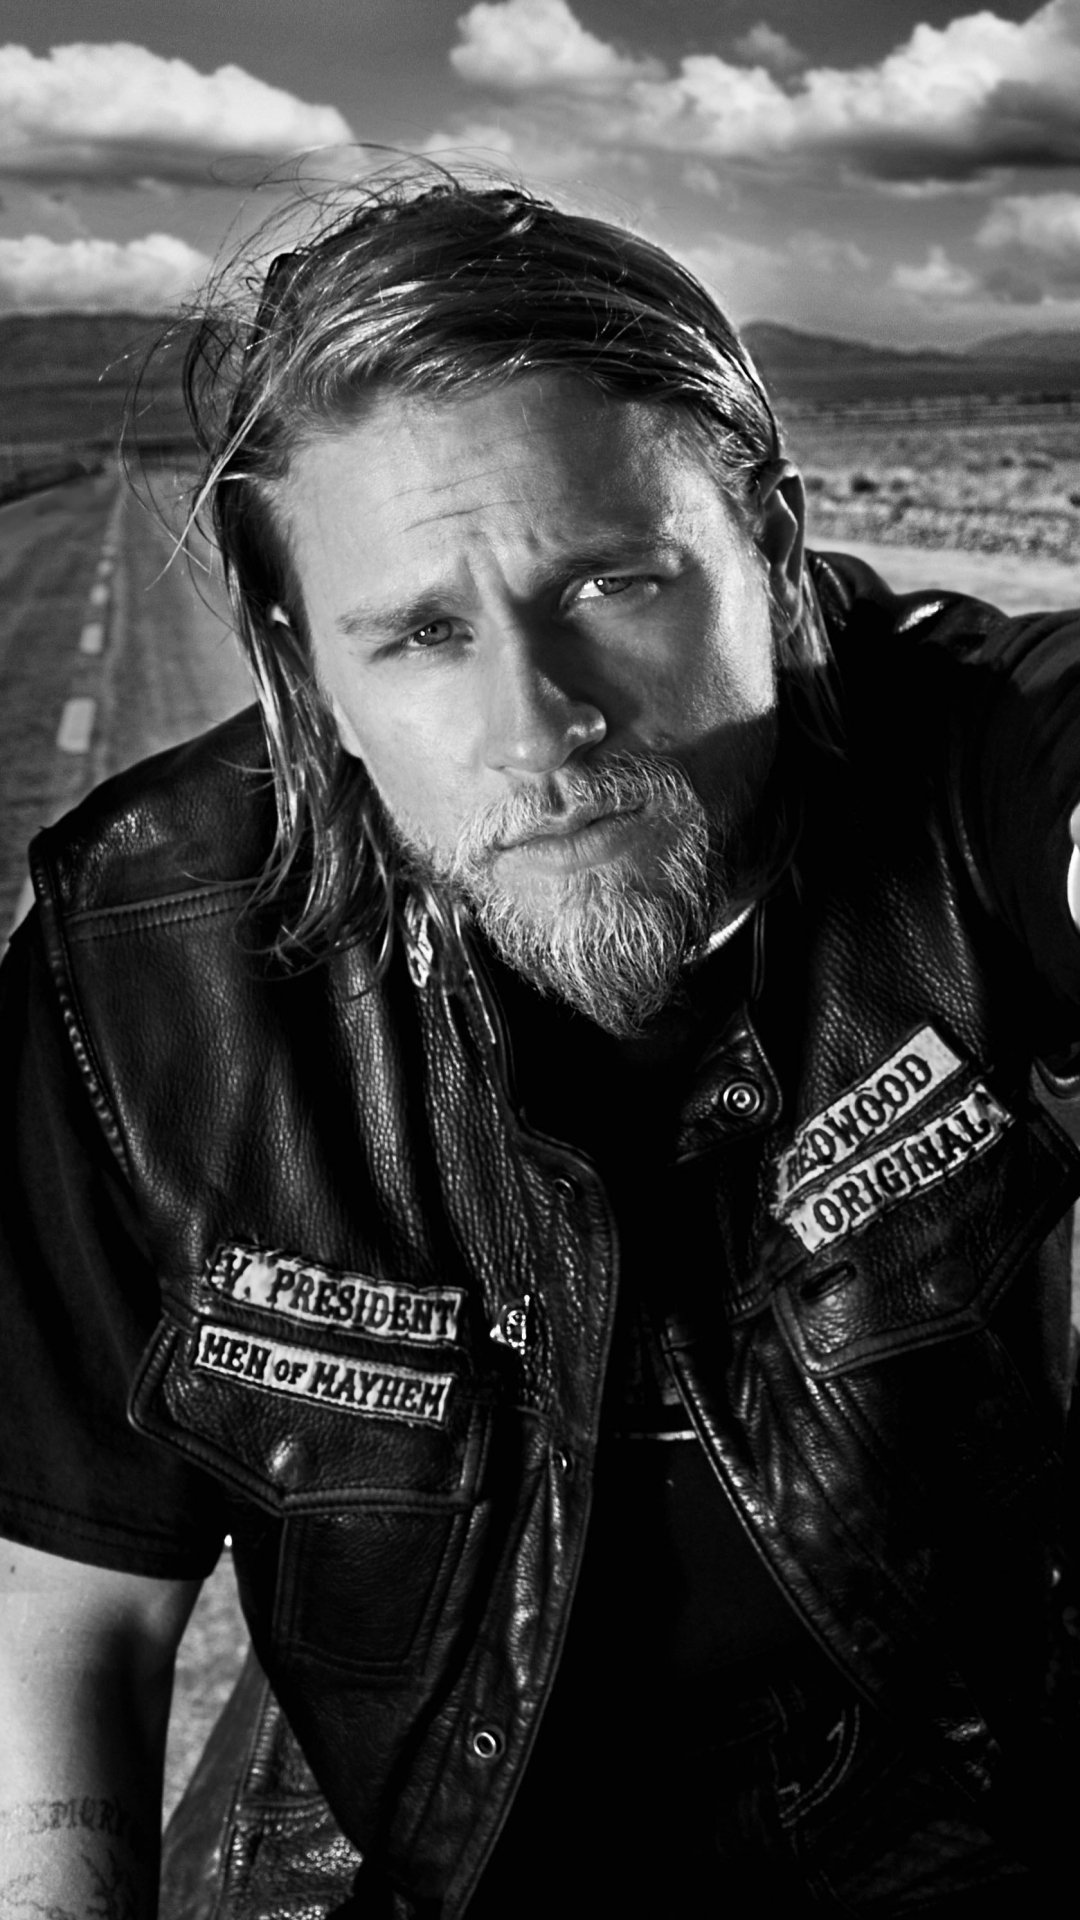 TV Show/Sons Of Anarchy (1080x1920) Wallpaper ID: 90107 - Mobile Abyss